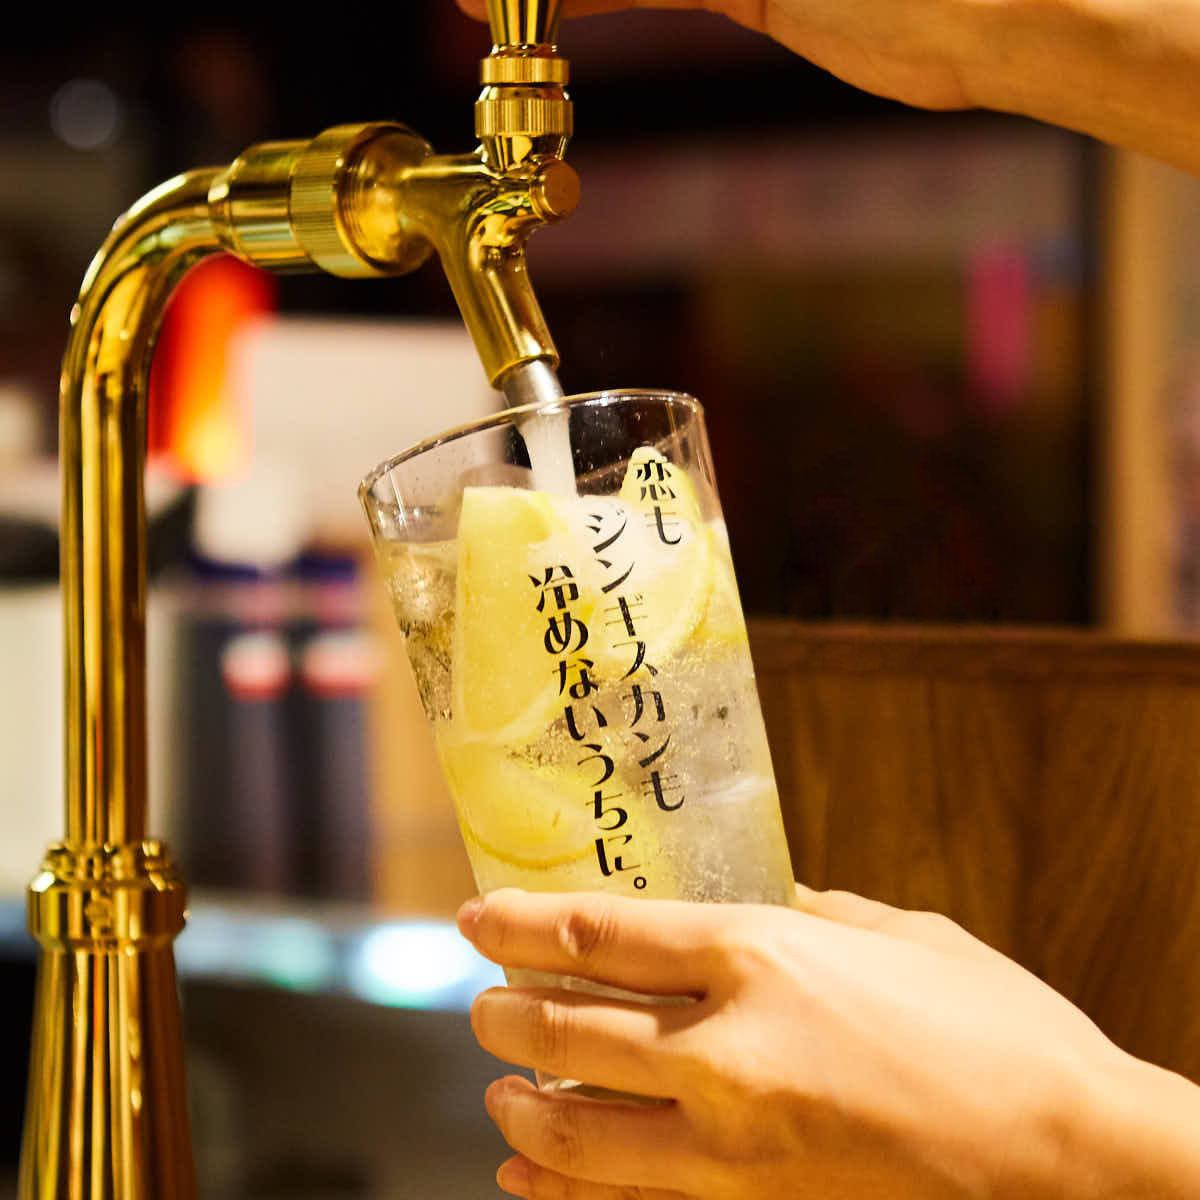 As much as you want, whenever you want! All-you-can-drink tabletop lemon sour for 60 minutes for 550 yen